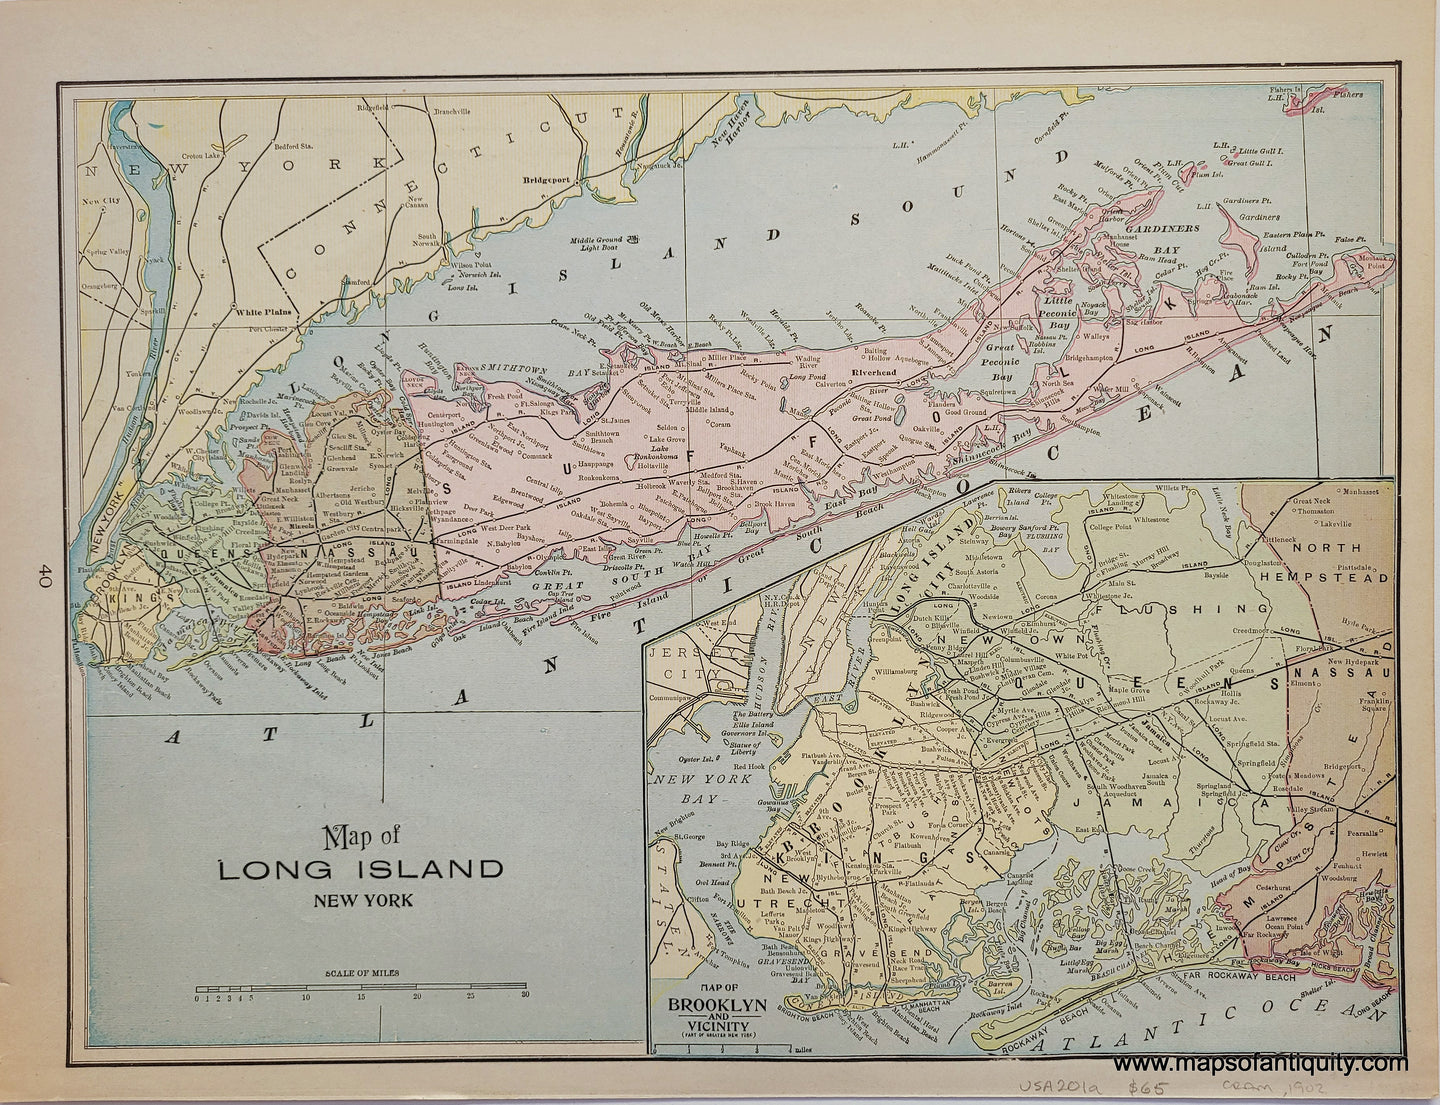 Map in pastel colors showing Long Island, colored by county, with a smaller map of Brooklyn and Queens